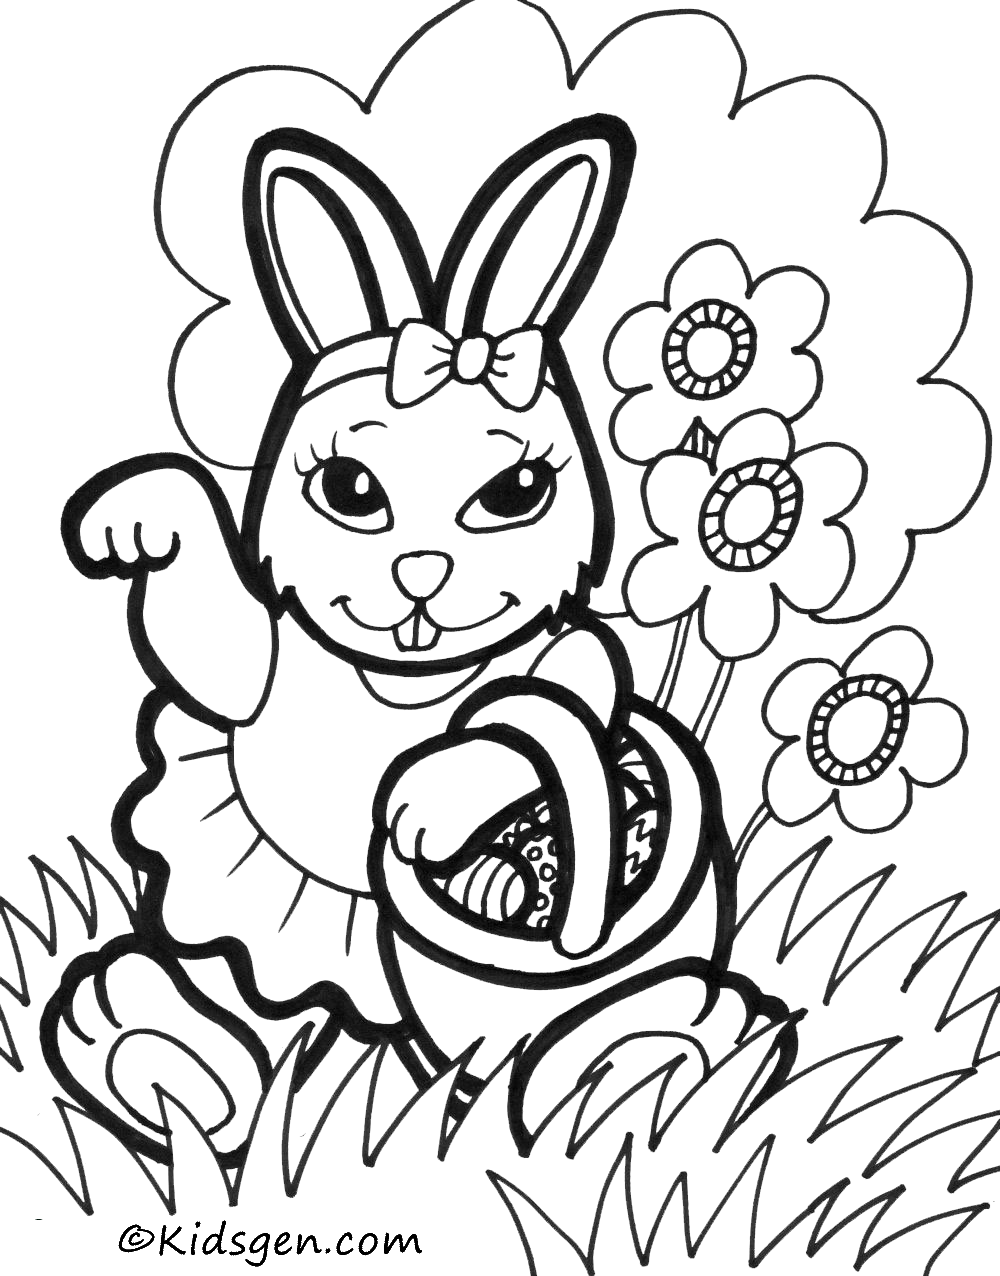 Rabbit coloring page